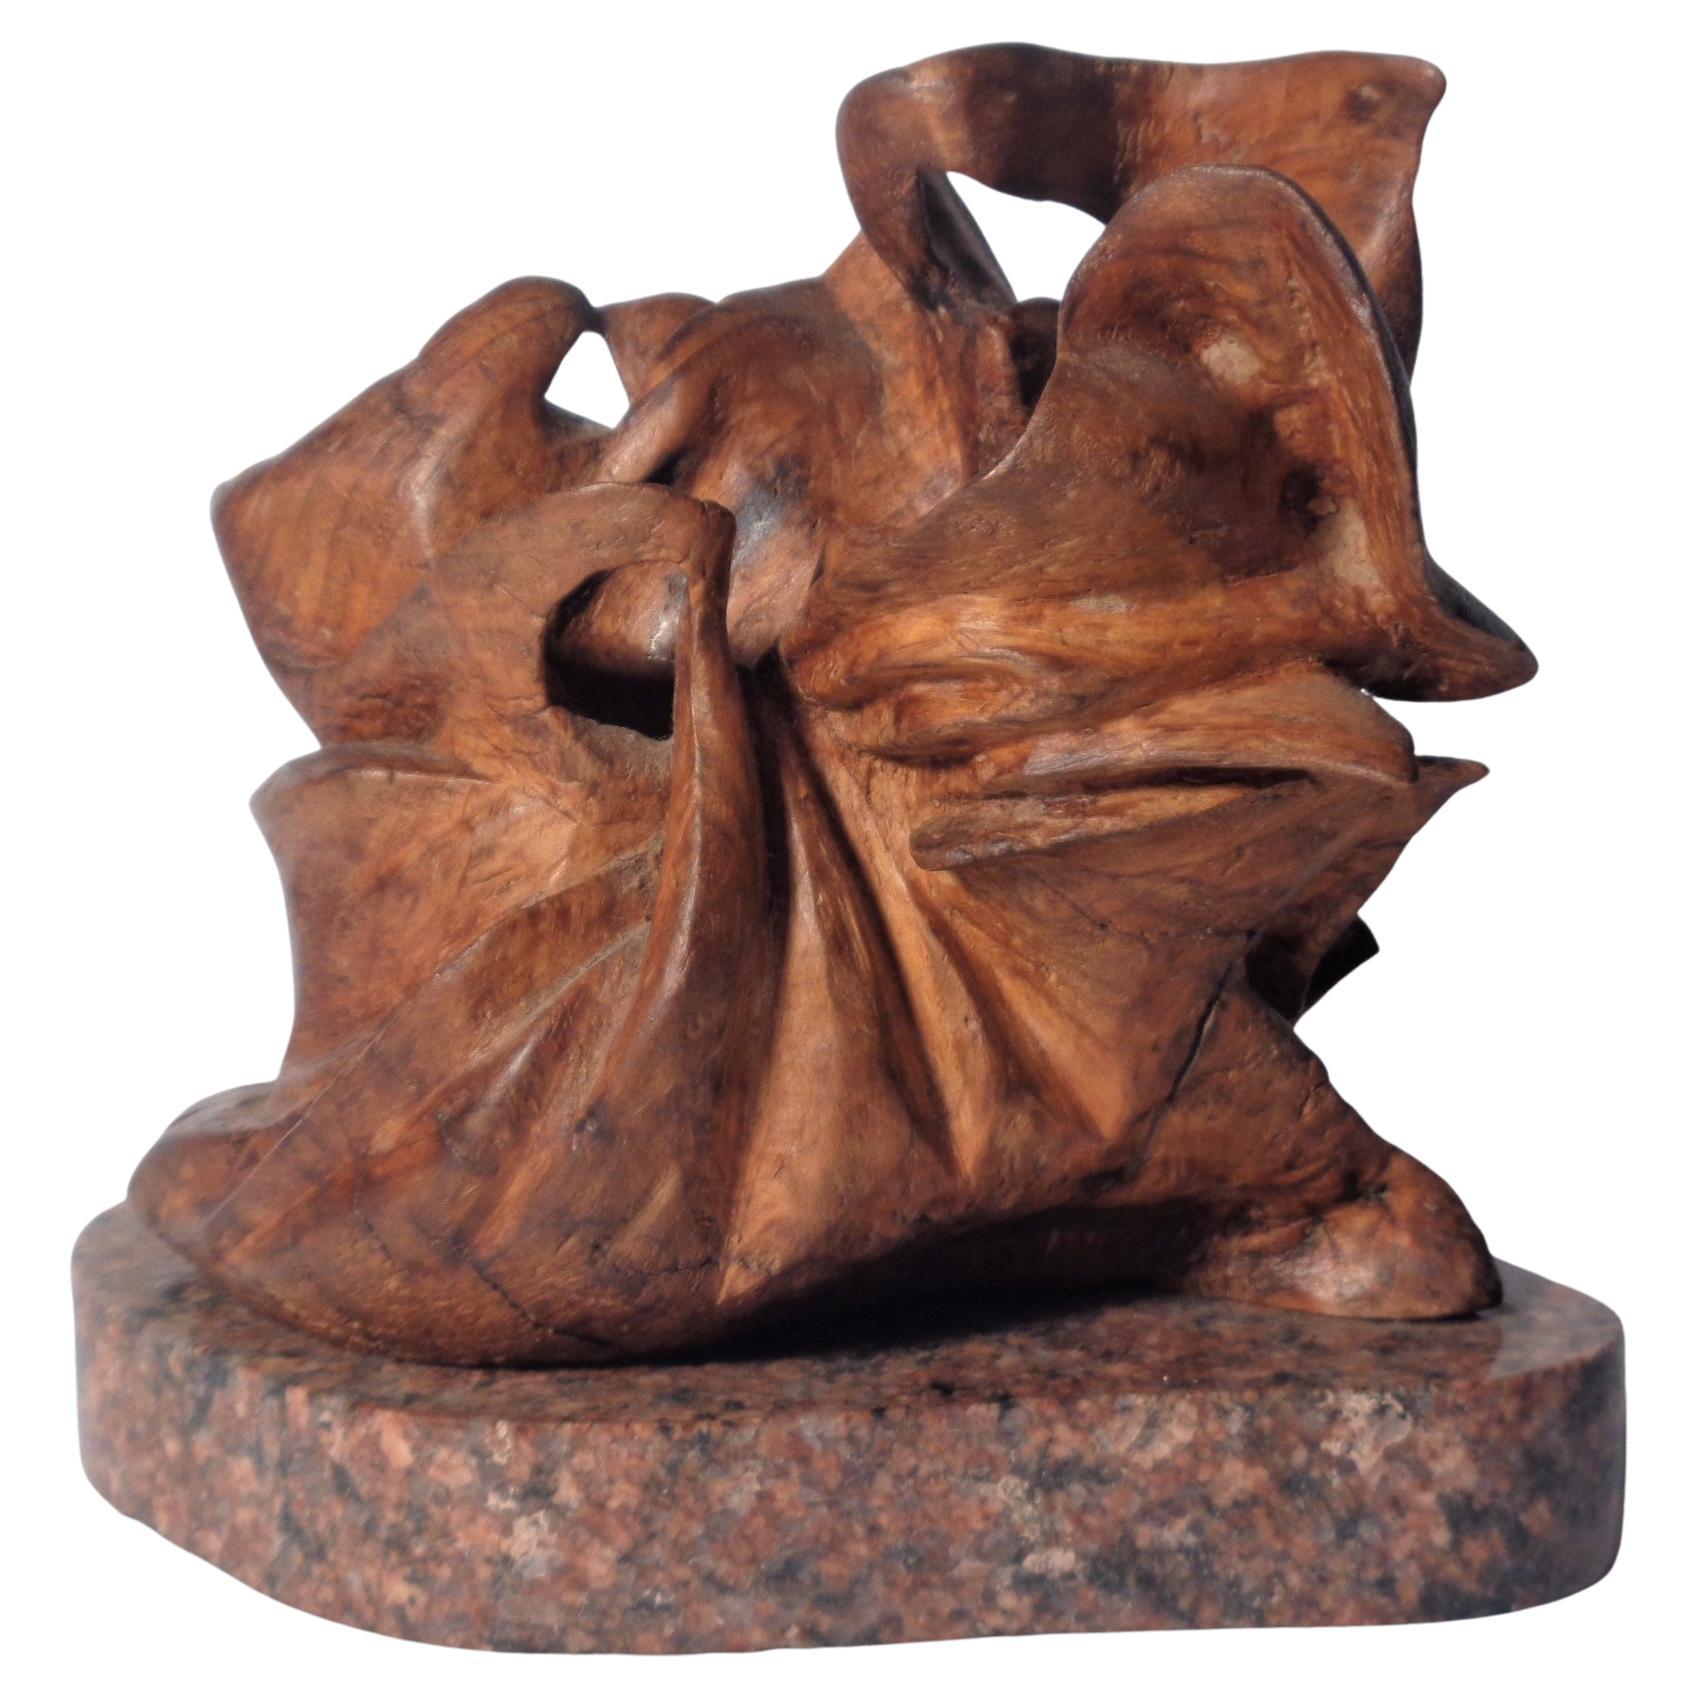   Naturalistic Carved Wood Sculpture by W.C. Rubottom, 1960-1979 For Sale 1